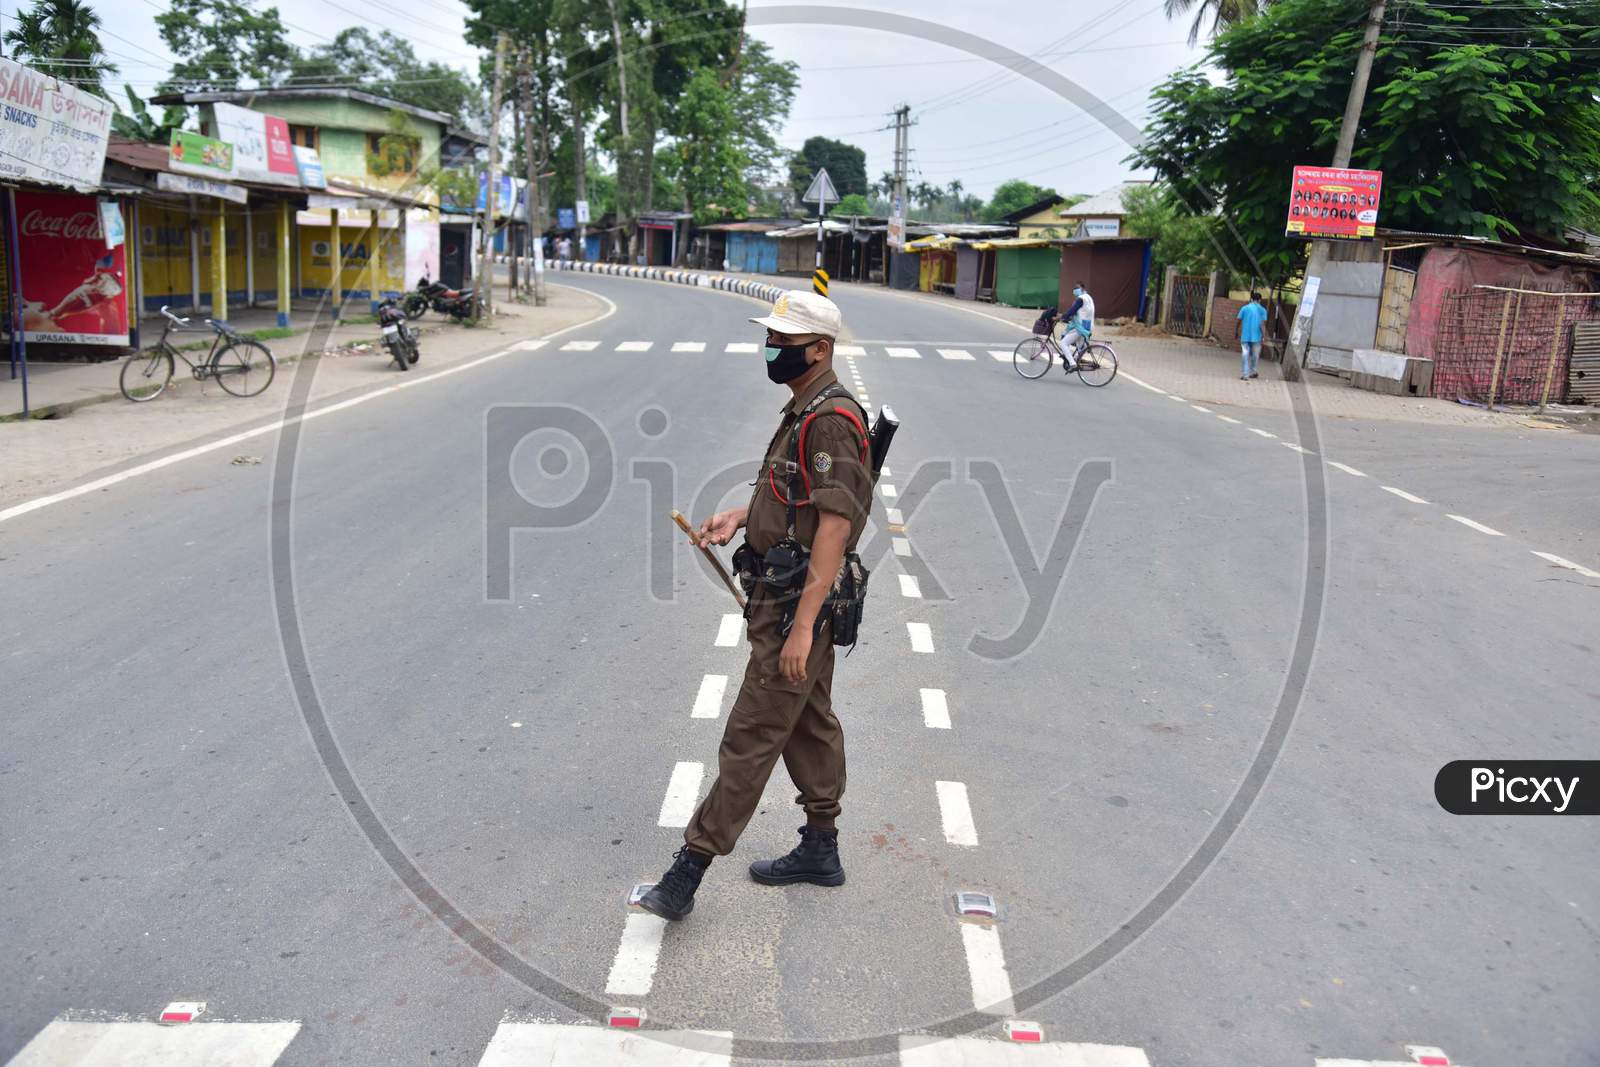 Security personnel patrolling the roads during the lockdown imposed by the Assam government to control the spread of coronavirus in Nagaon, Assam on July 04, 2020